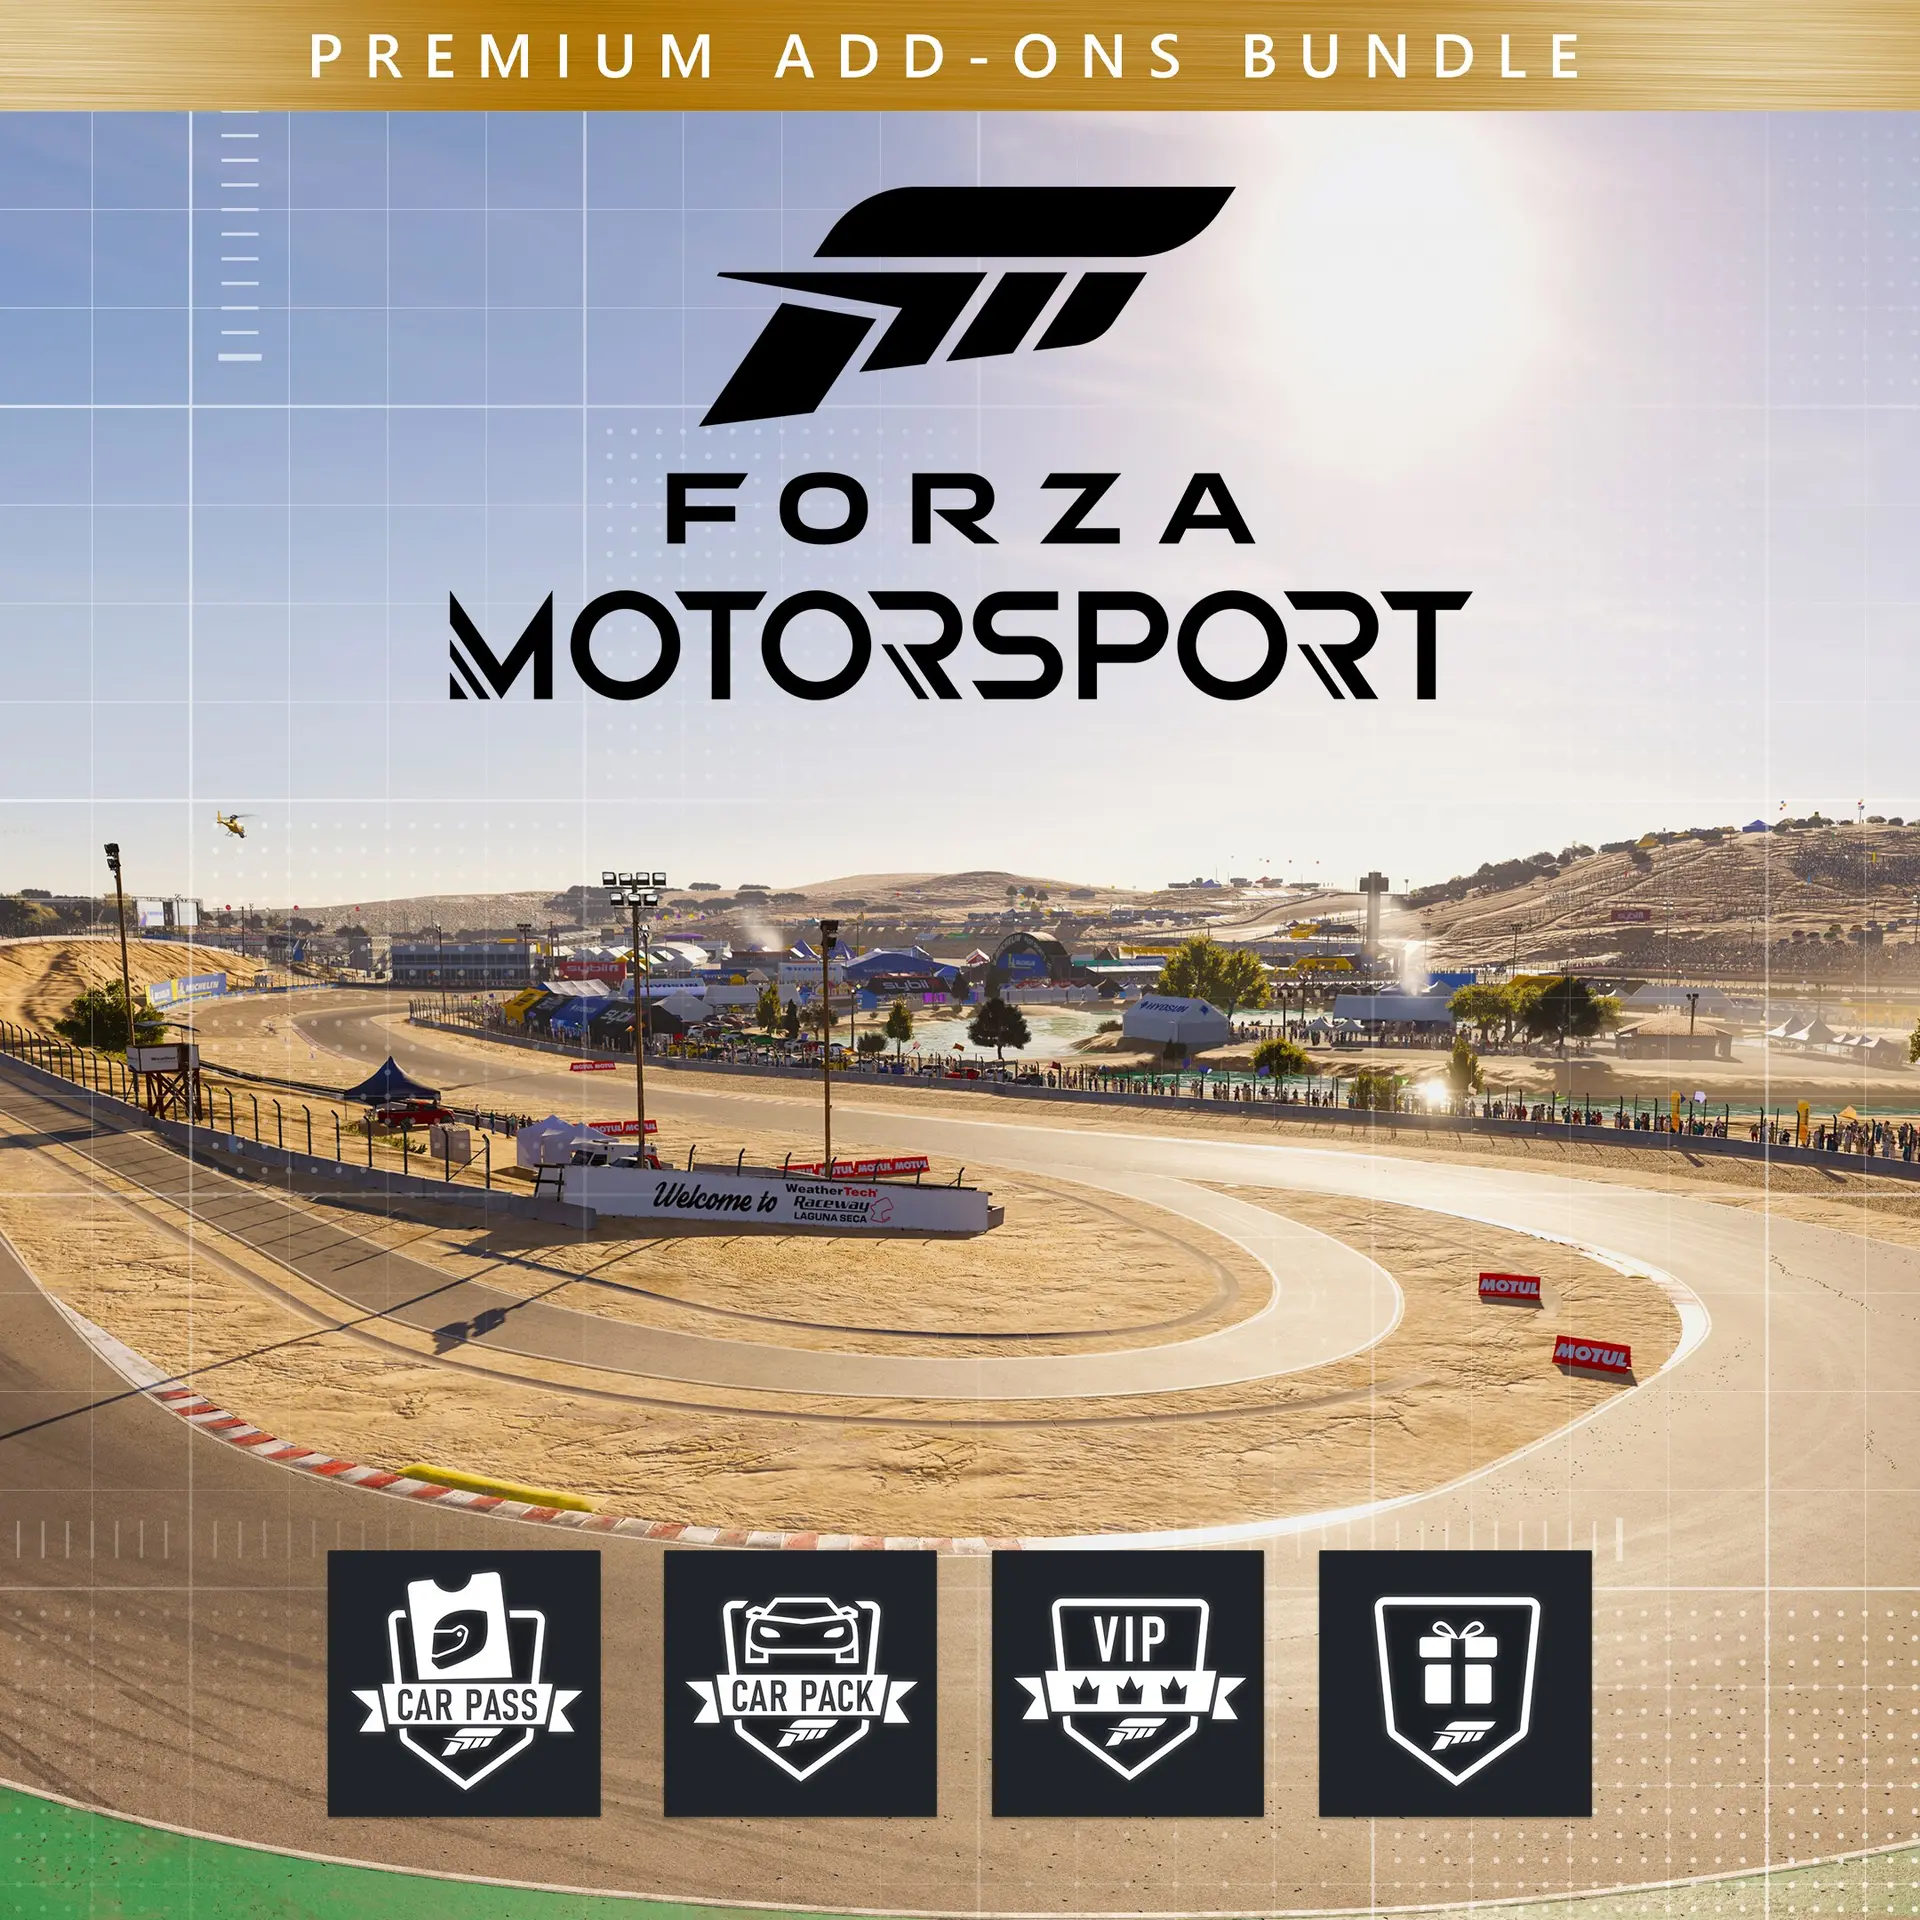 Forza Motorsport Premium Add-Ons Bundle (XBOX One - Cheapest Store)